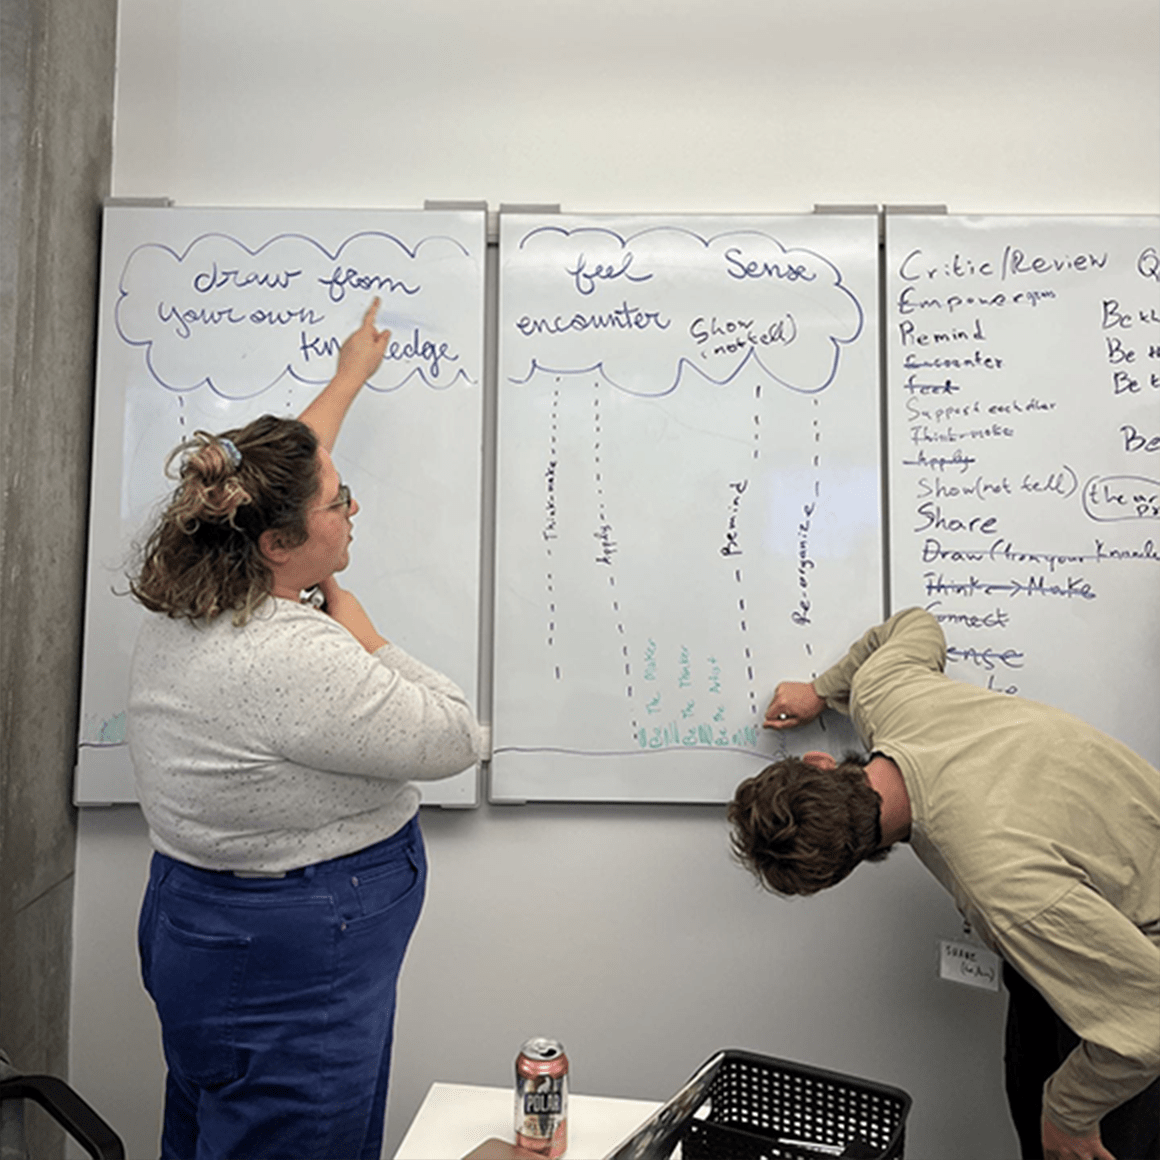 Two graduate students working at a whiteboard.